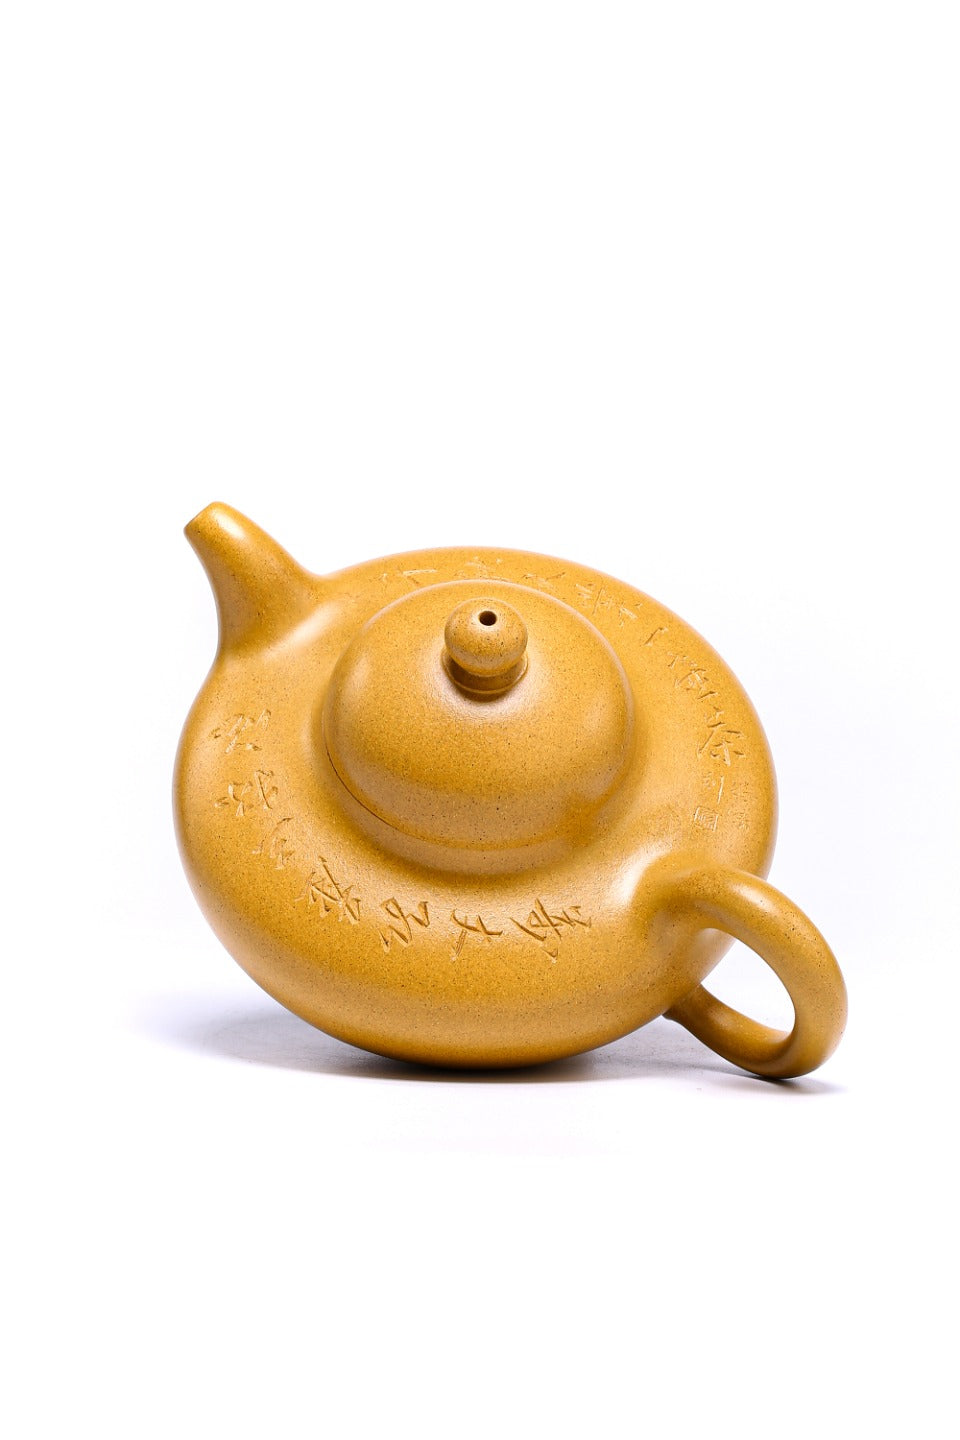 Nihuaying Zisha teapot in the golden section of the original ore